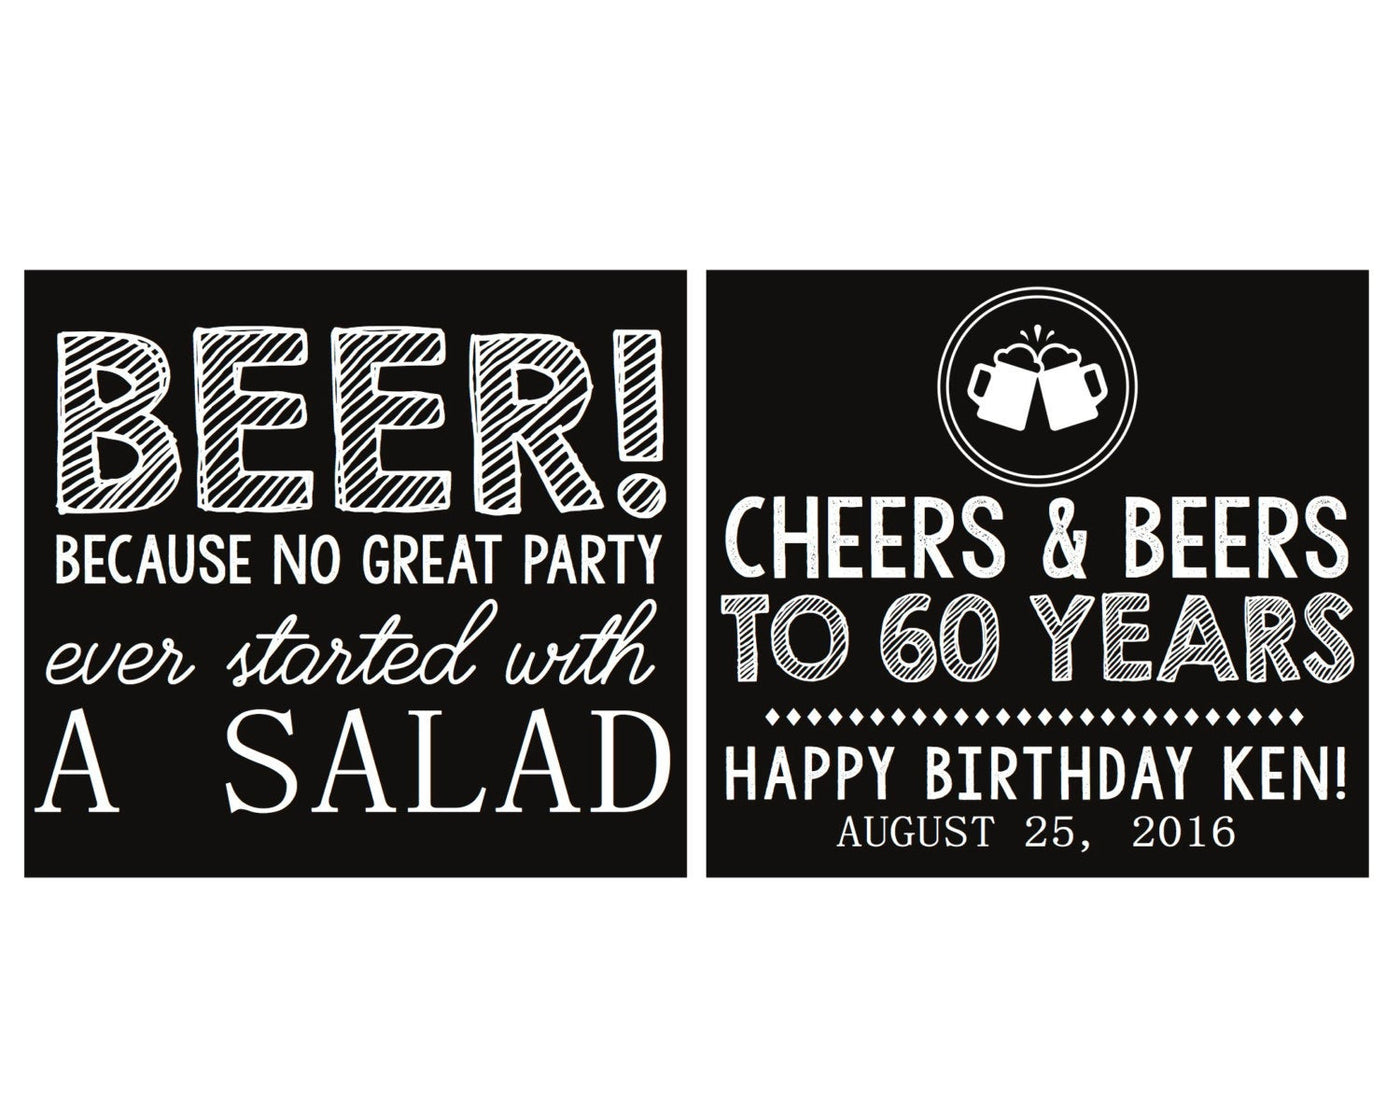 Cheers and Beers Birthday Party Neoprene Can Coolers, #1654